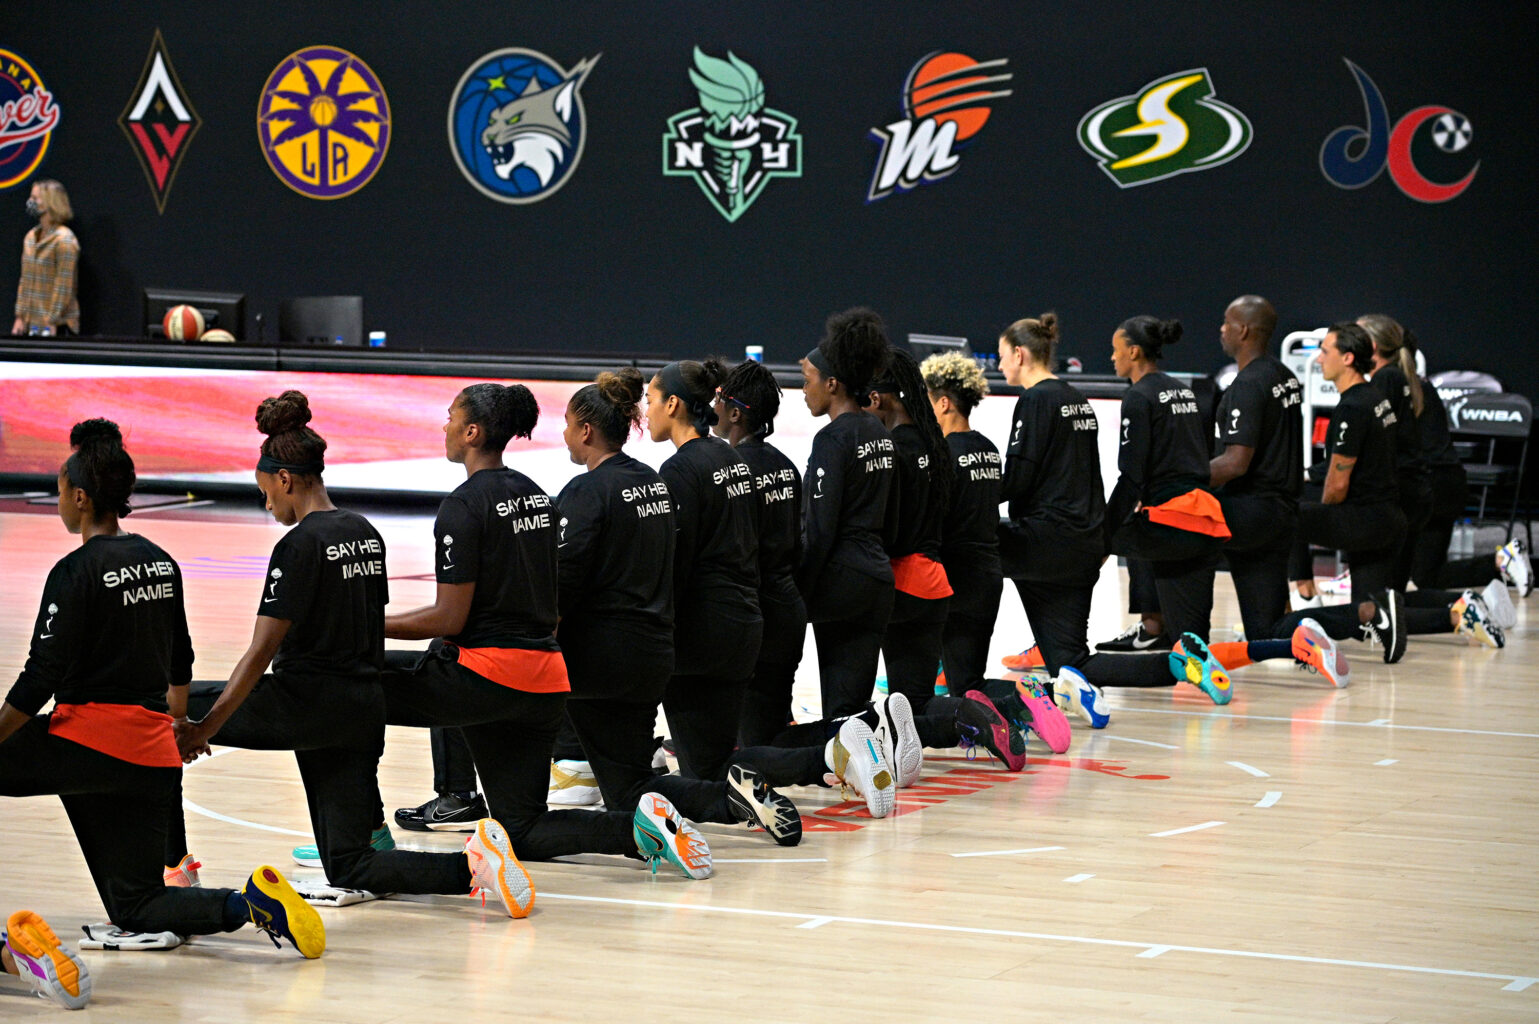 Members of the Connecticut Sun kneel during the playing of the national anthem before a WNBA basketball first round playoff game against the Chicago Sky, Tuesday, Sept. 15, 2020, in Bradenton, Fla. (AP Photo/Phelan M. Ebenhack)